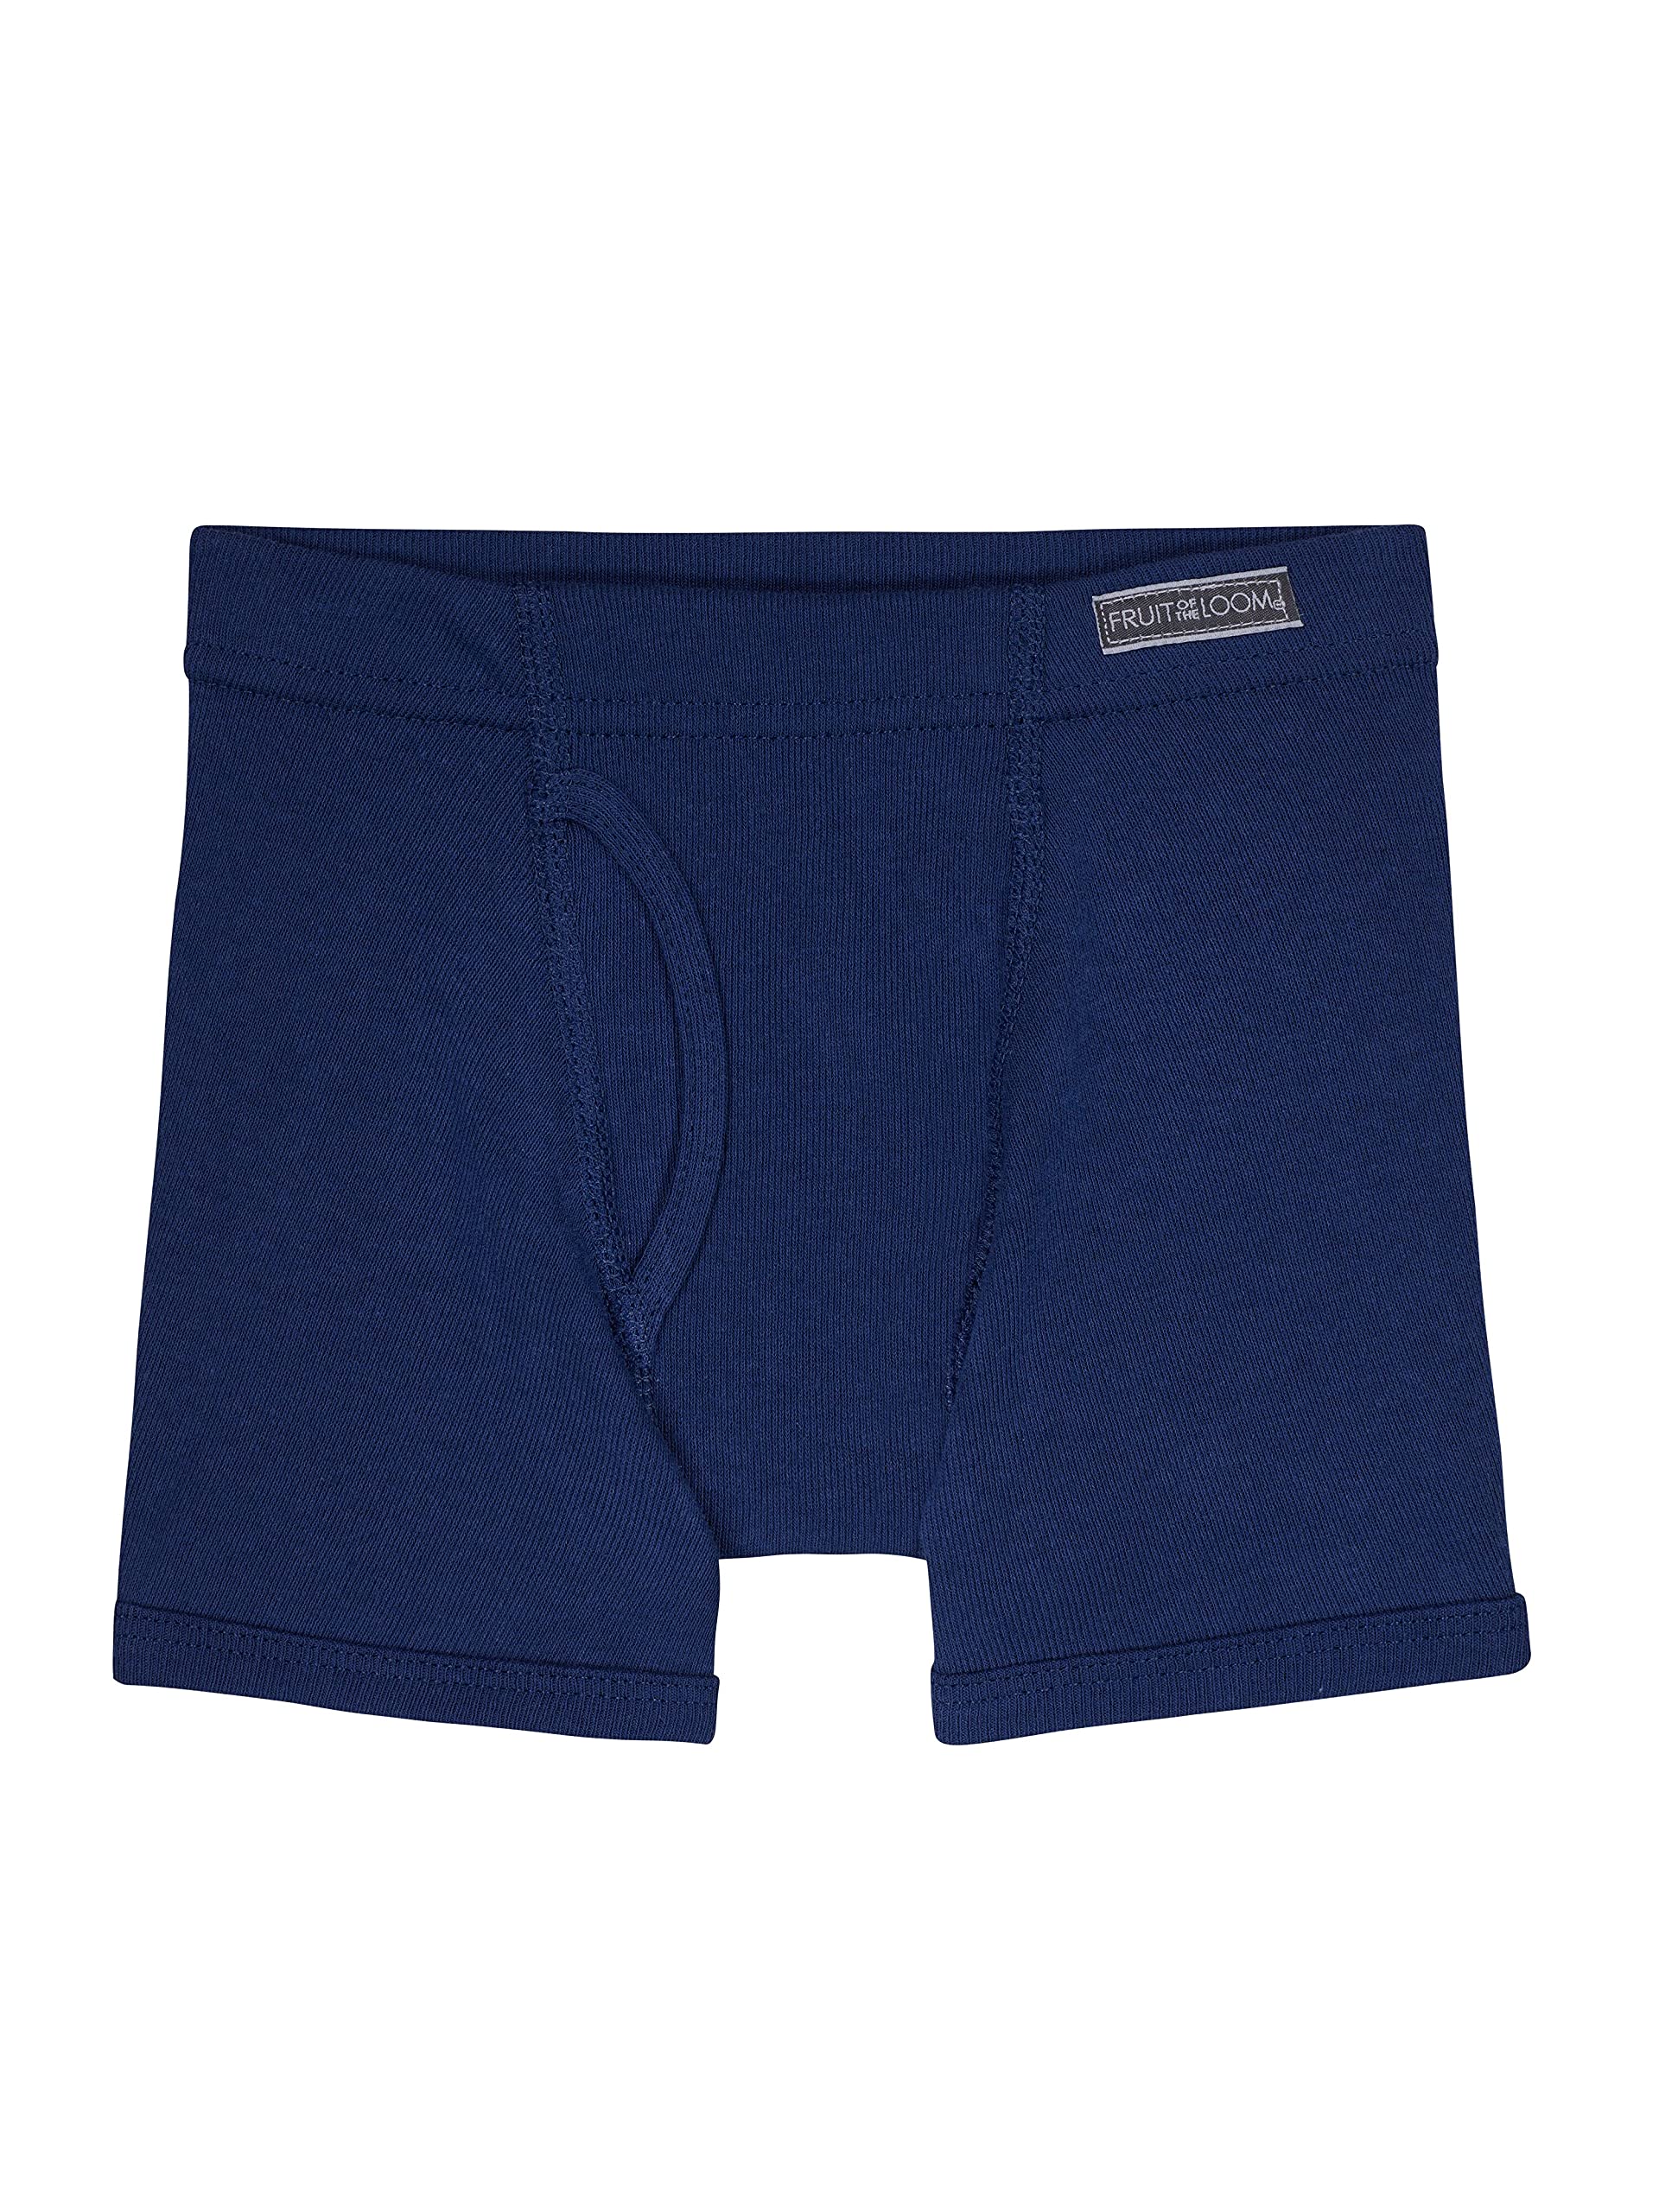 Fruit of the Loom Boys' Tag Free Cotton Boxer Briefs